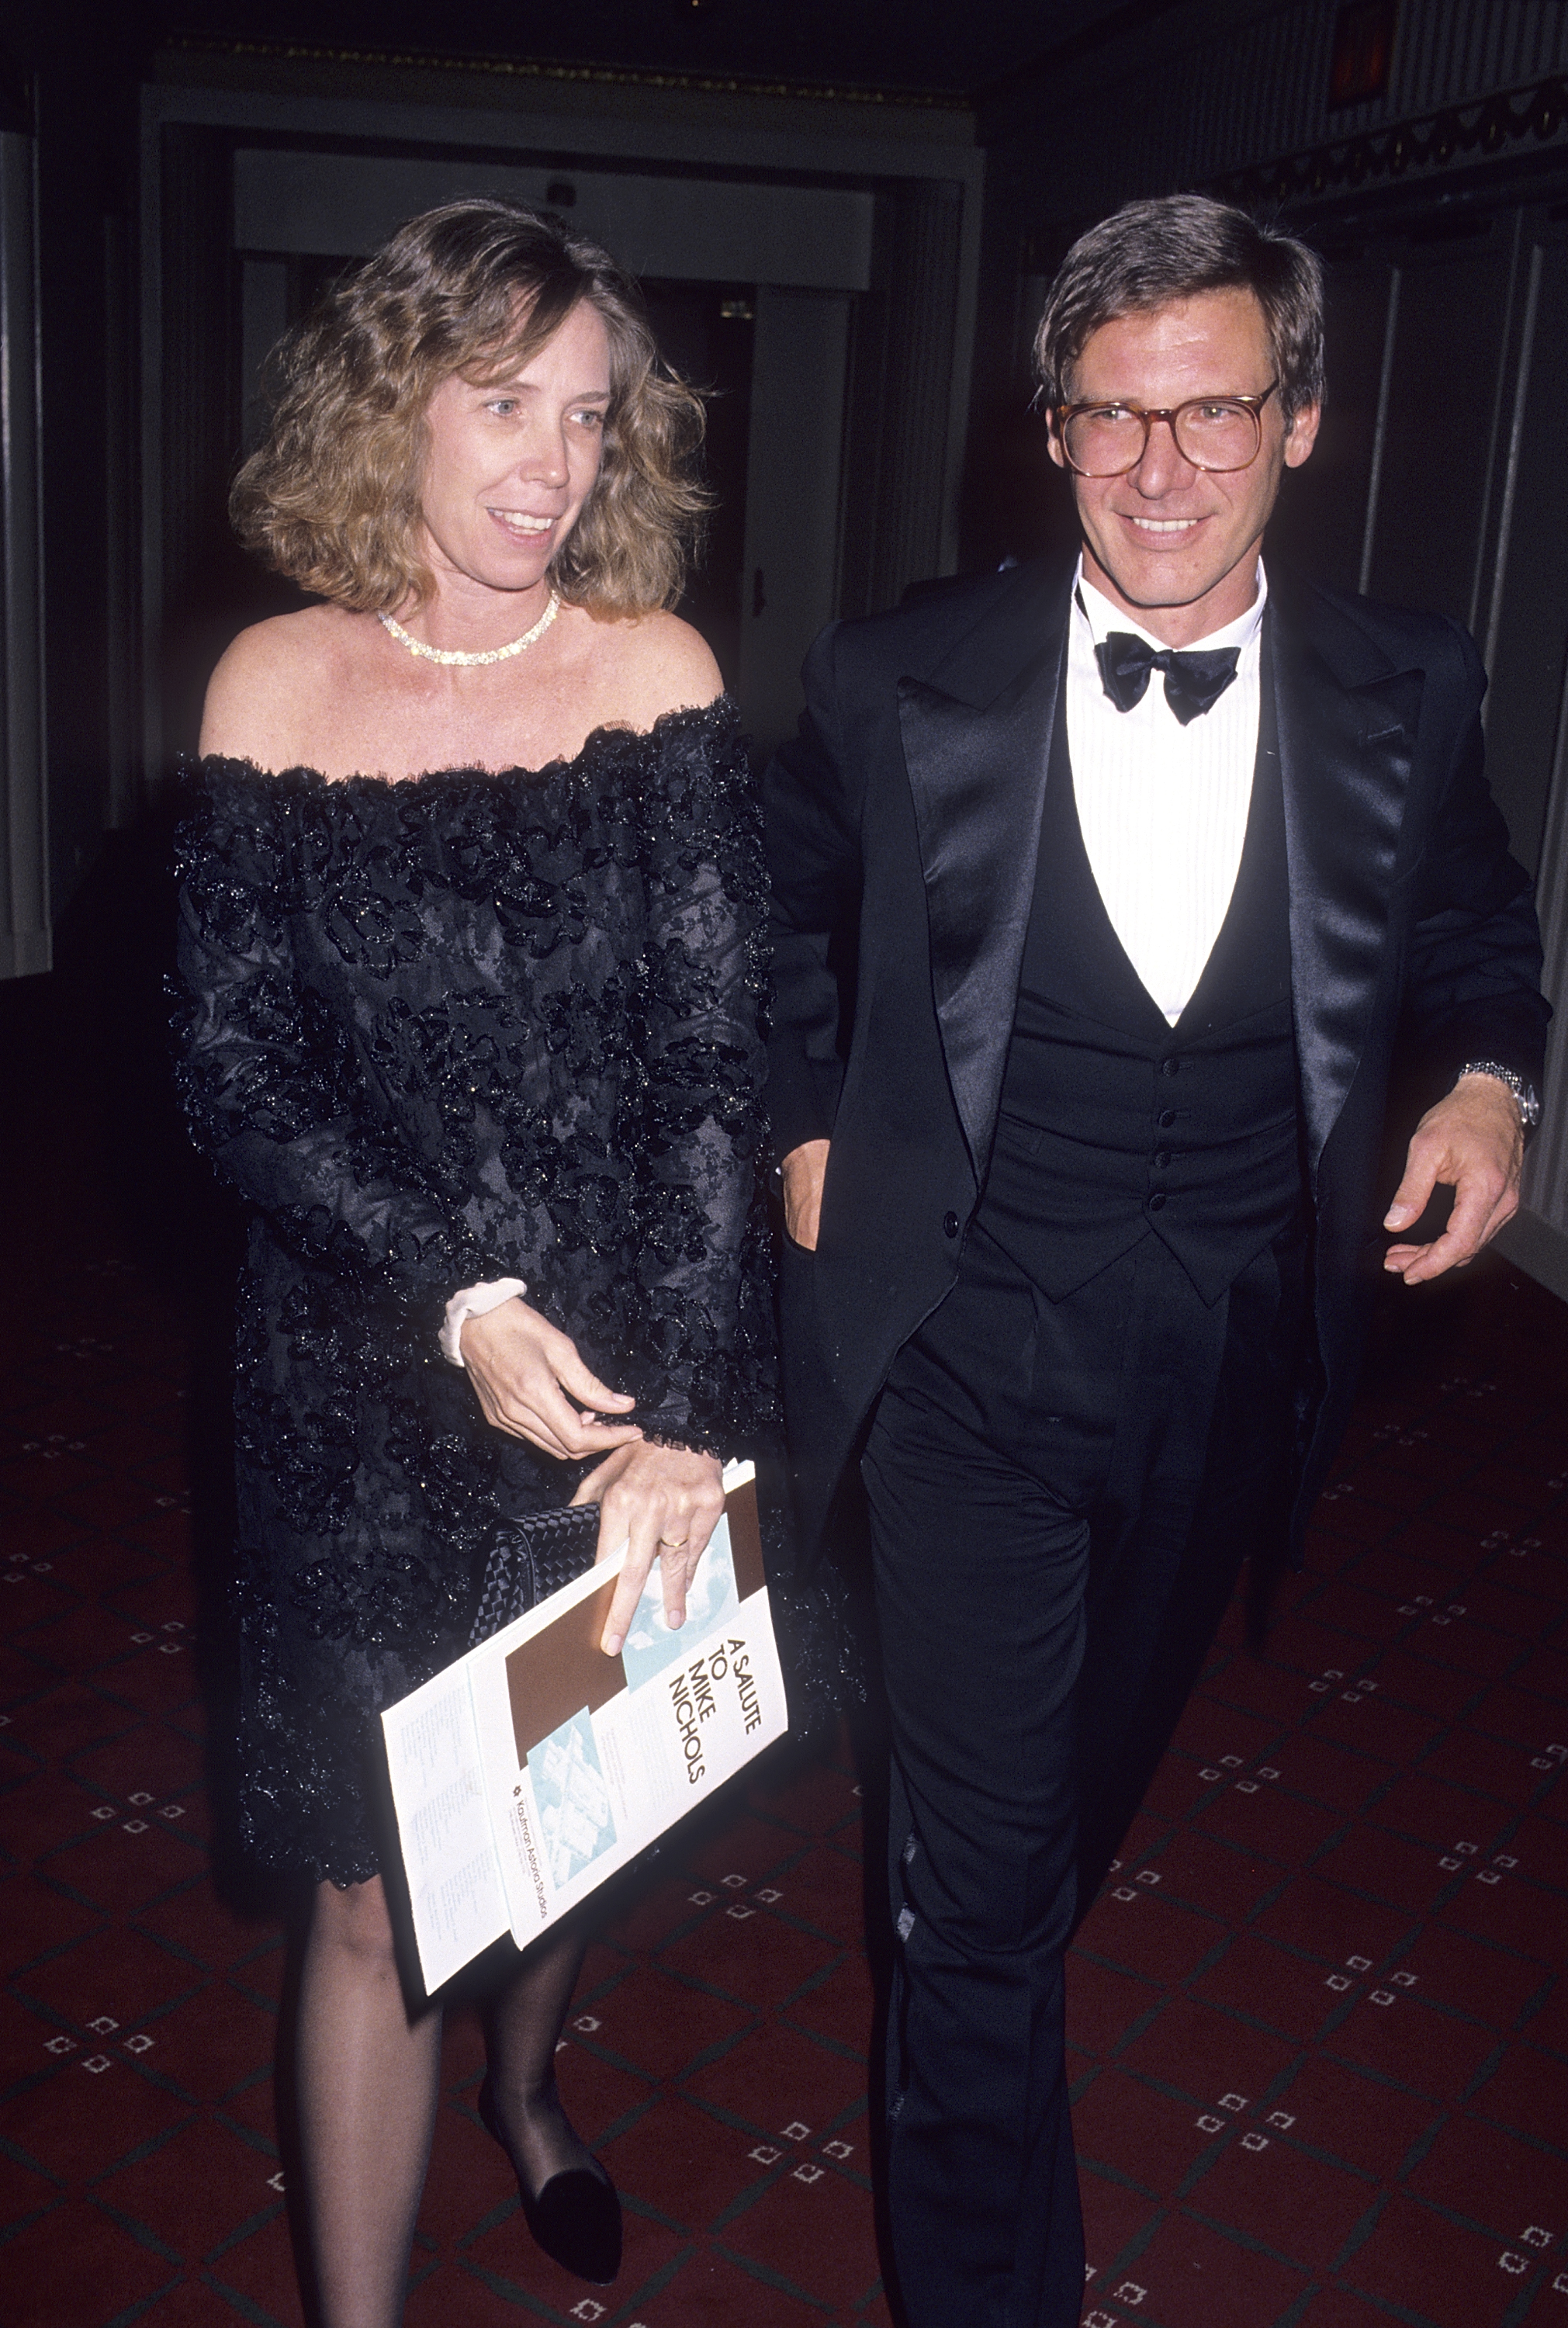 Harrison Ford and Melissa Mathison at the Waldorf-Astoria Hotel in New York City on February 27, 1990 | Source: Getty Images